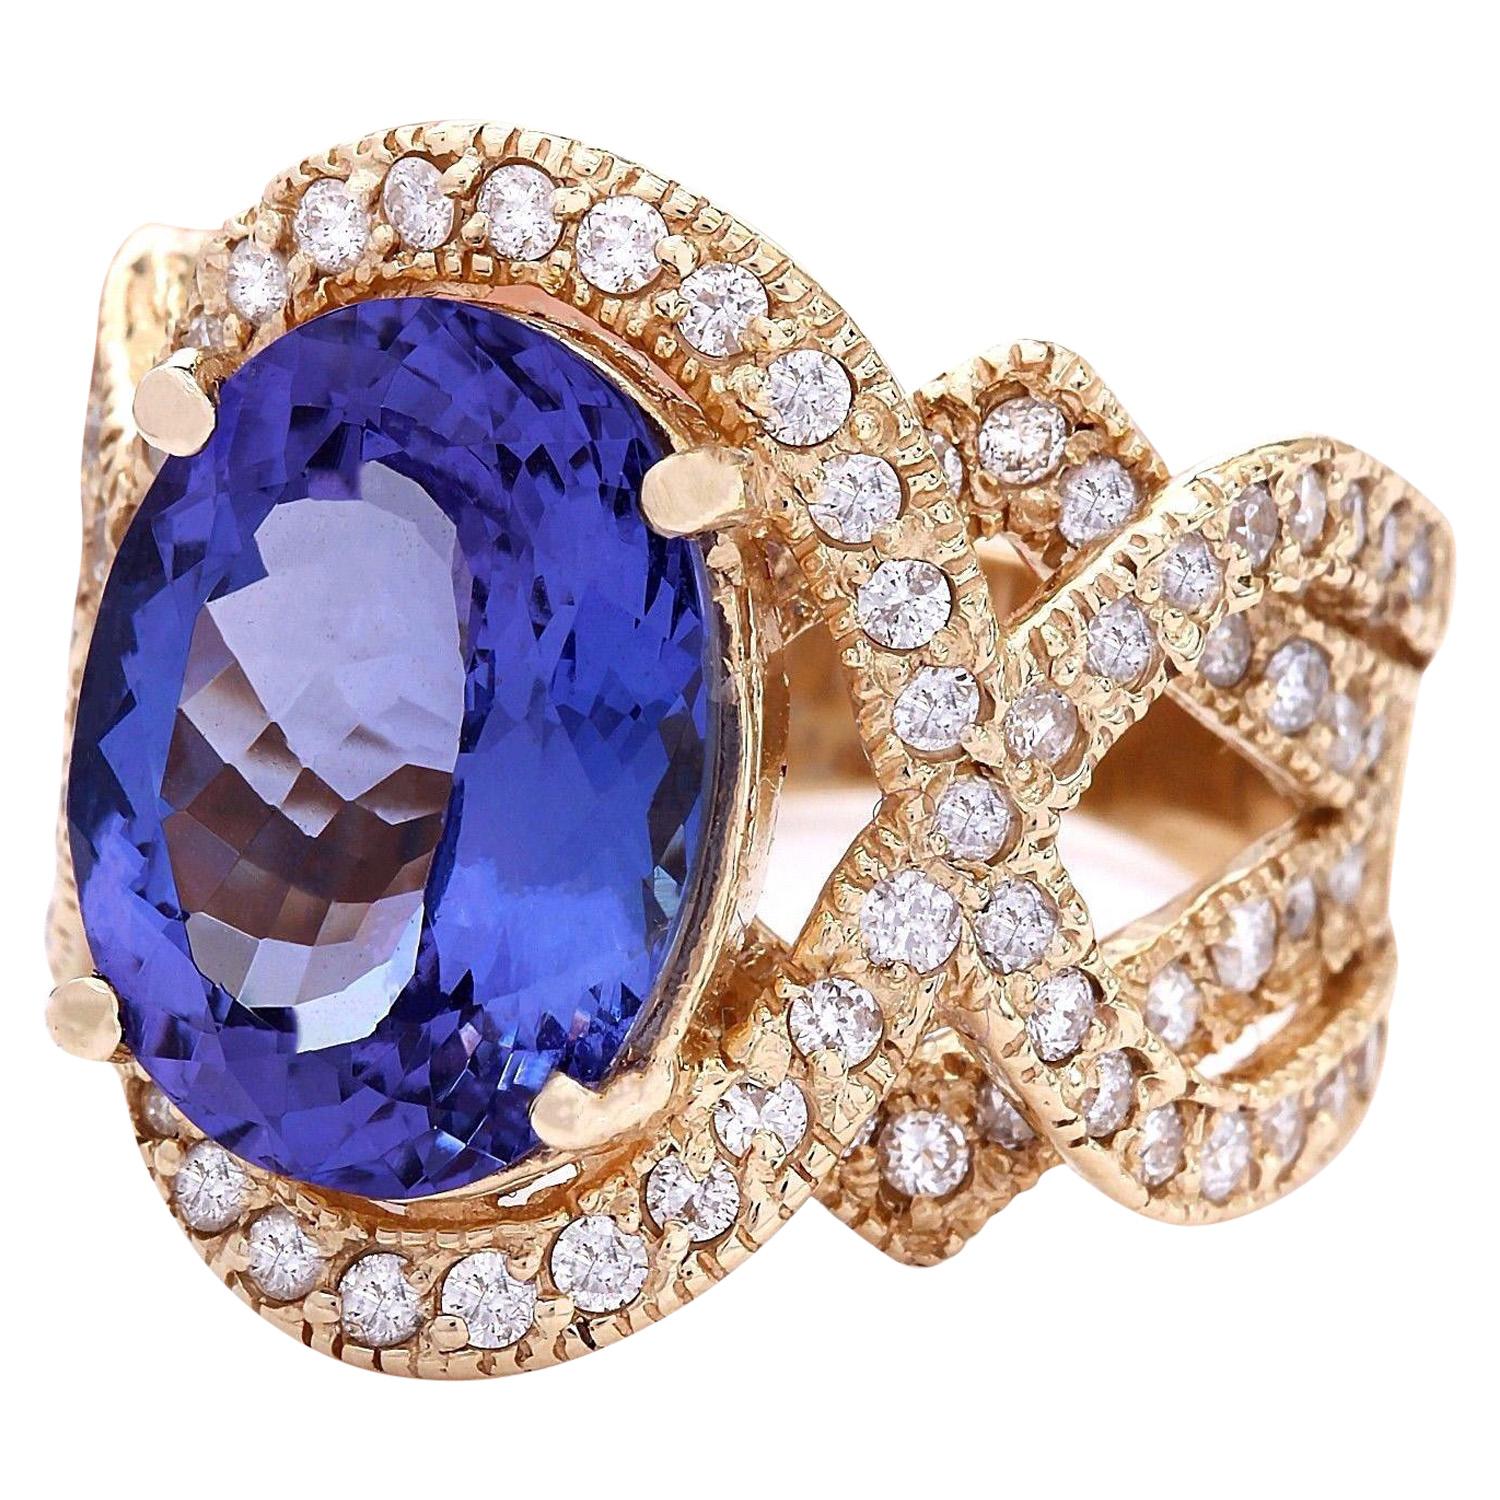 10.62 Carat  Tanzanite 14K Solid Yellow Gold Diamond Ring
Item Type: Ring
Item Style: Cocktail
Material: 14K Yellow Gold
Mainstone: Tanzanite
Stone Color: Blue
Stone Weight: 8.62 Carat
Stone Shape: Oval
Stone Quantity: 1
Stone Dimensions: